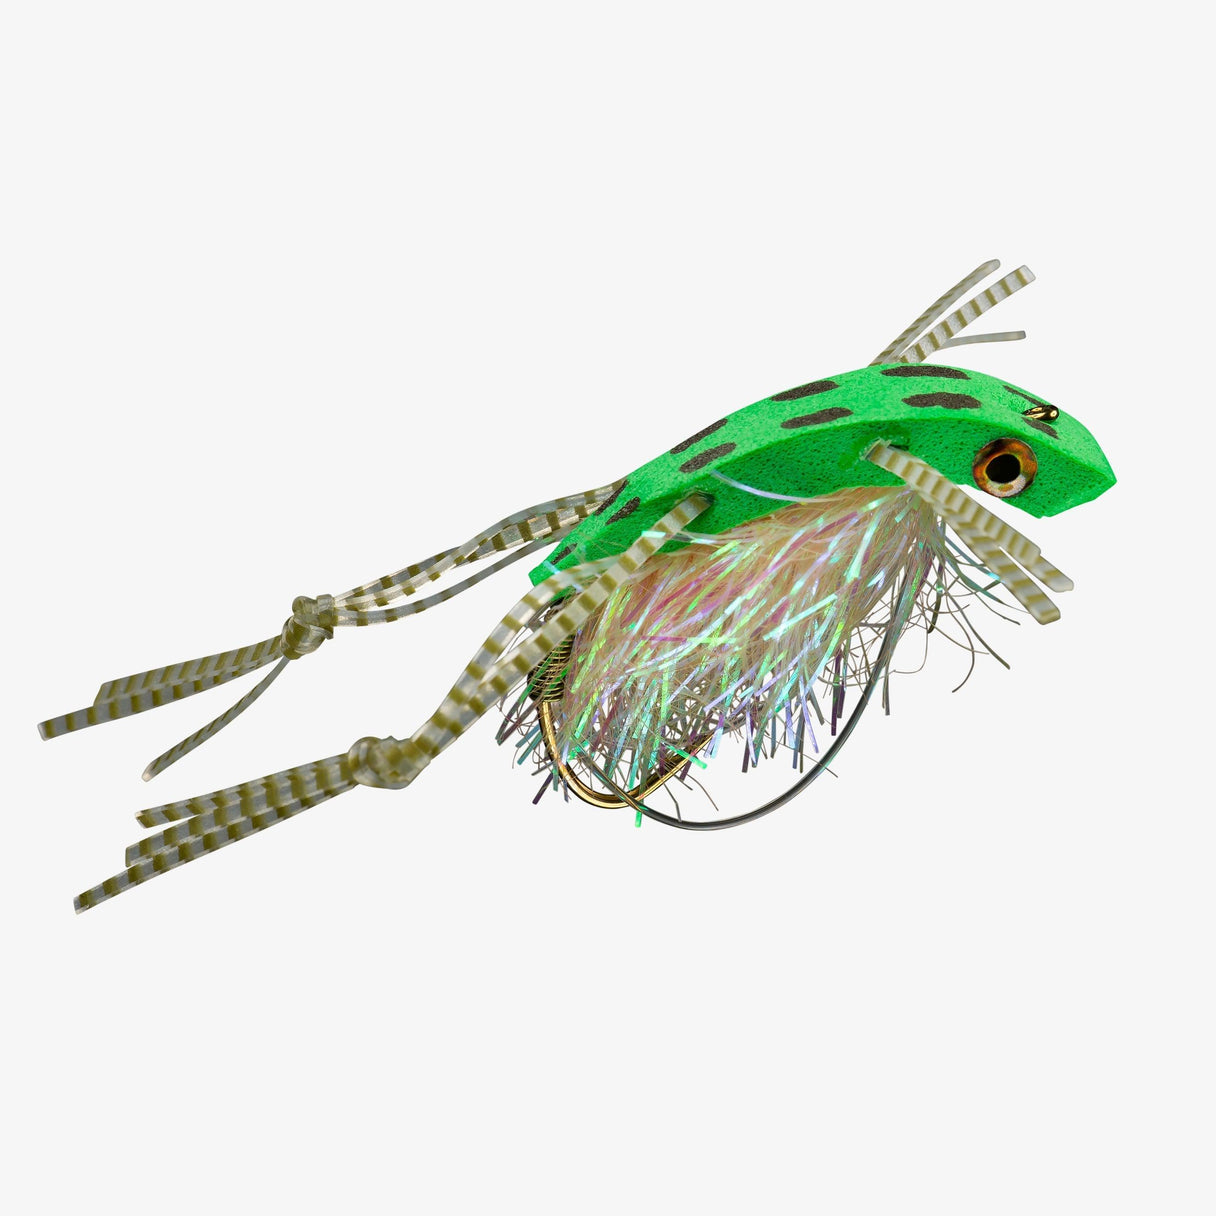 Leopard Swimming Frog 3/0 |  | #product-color#